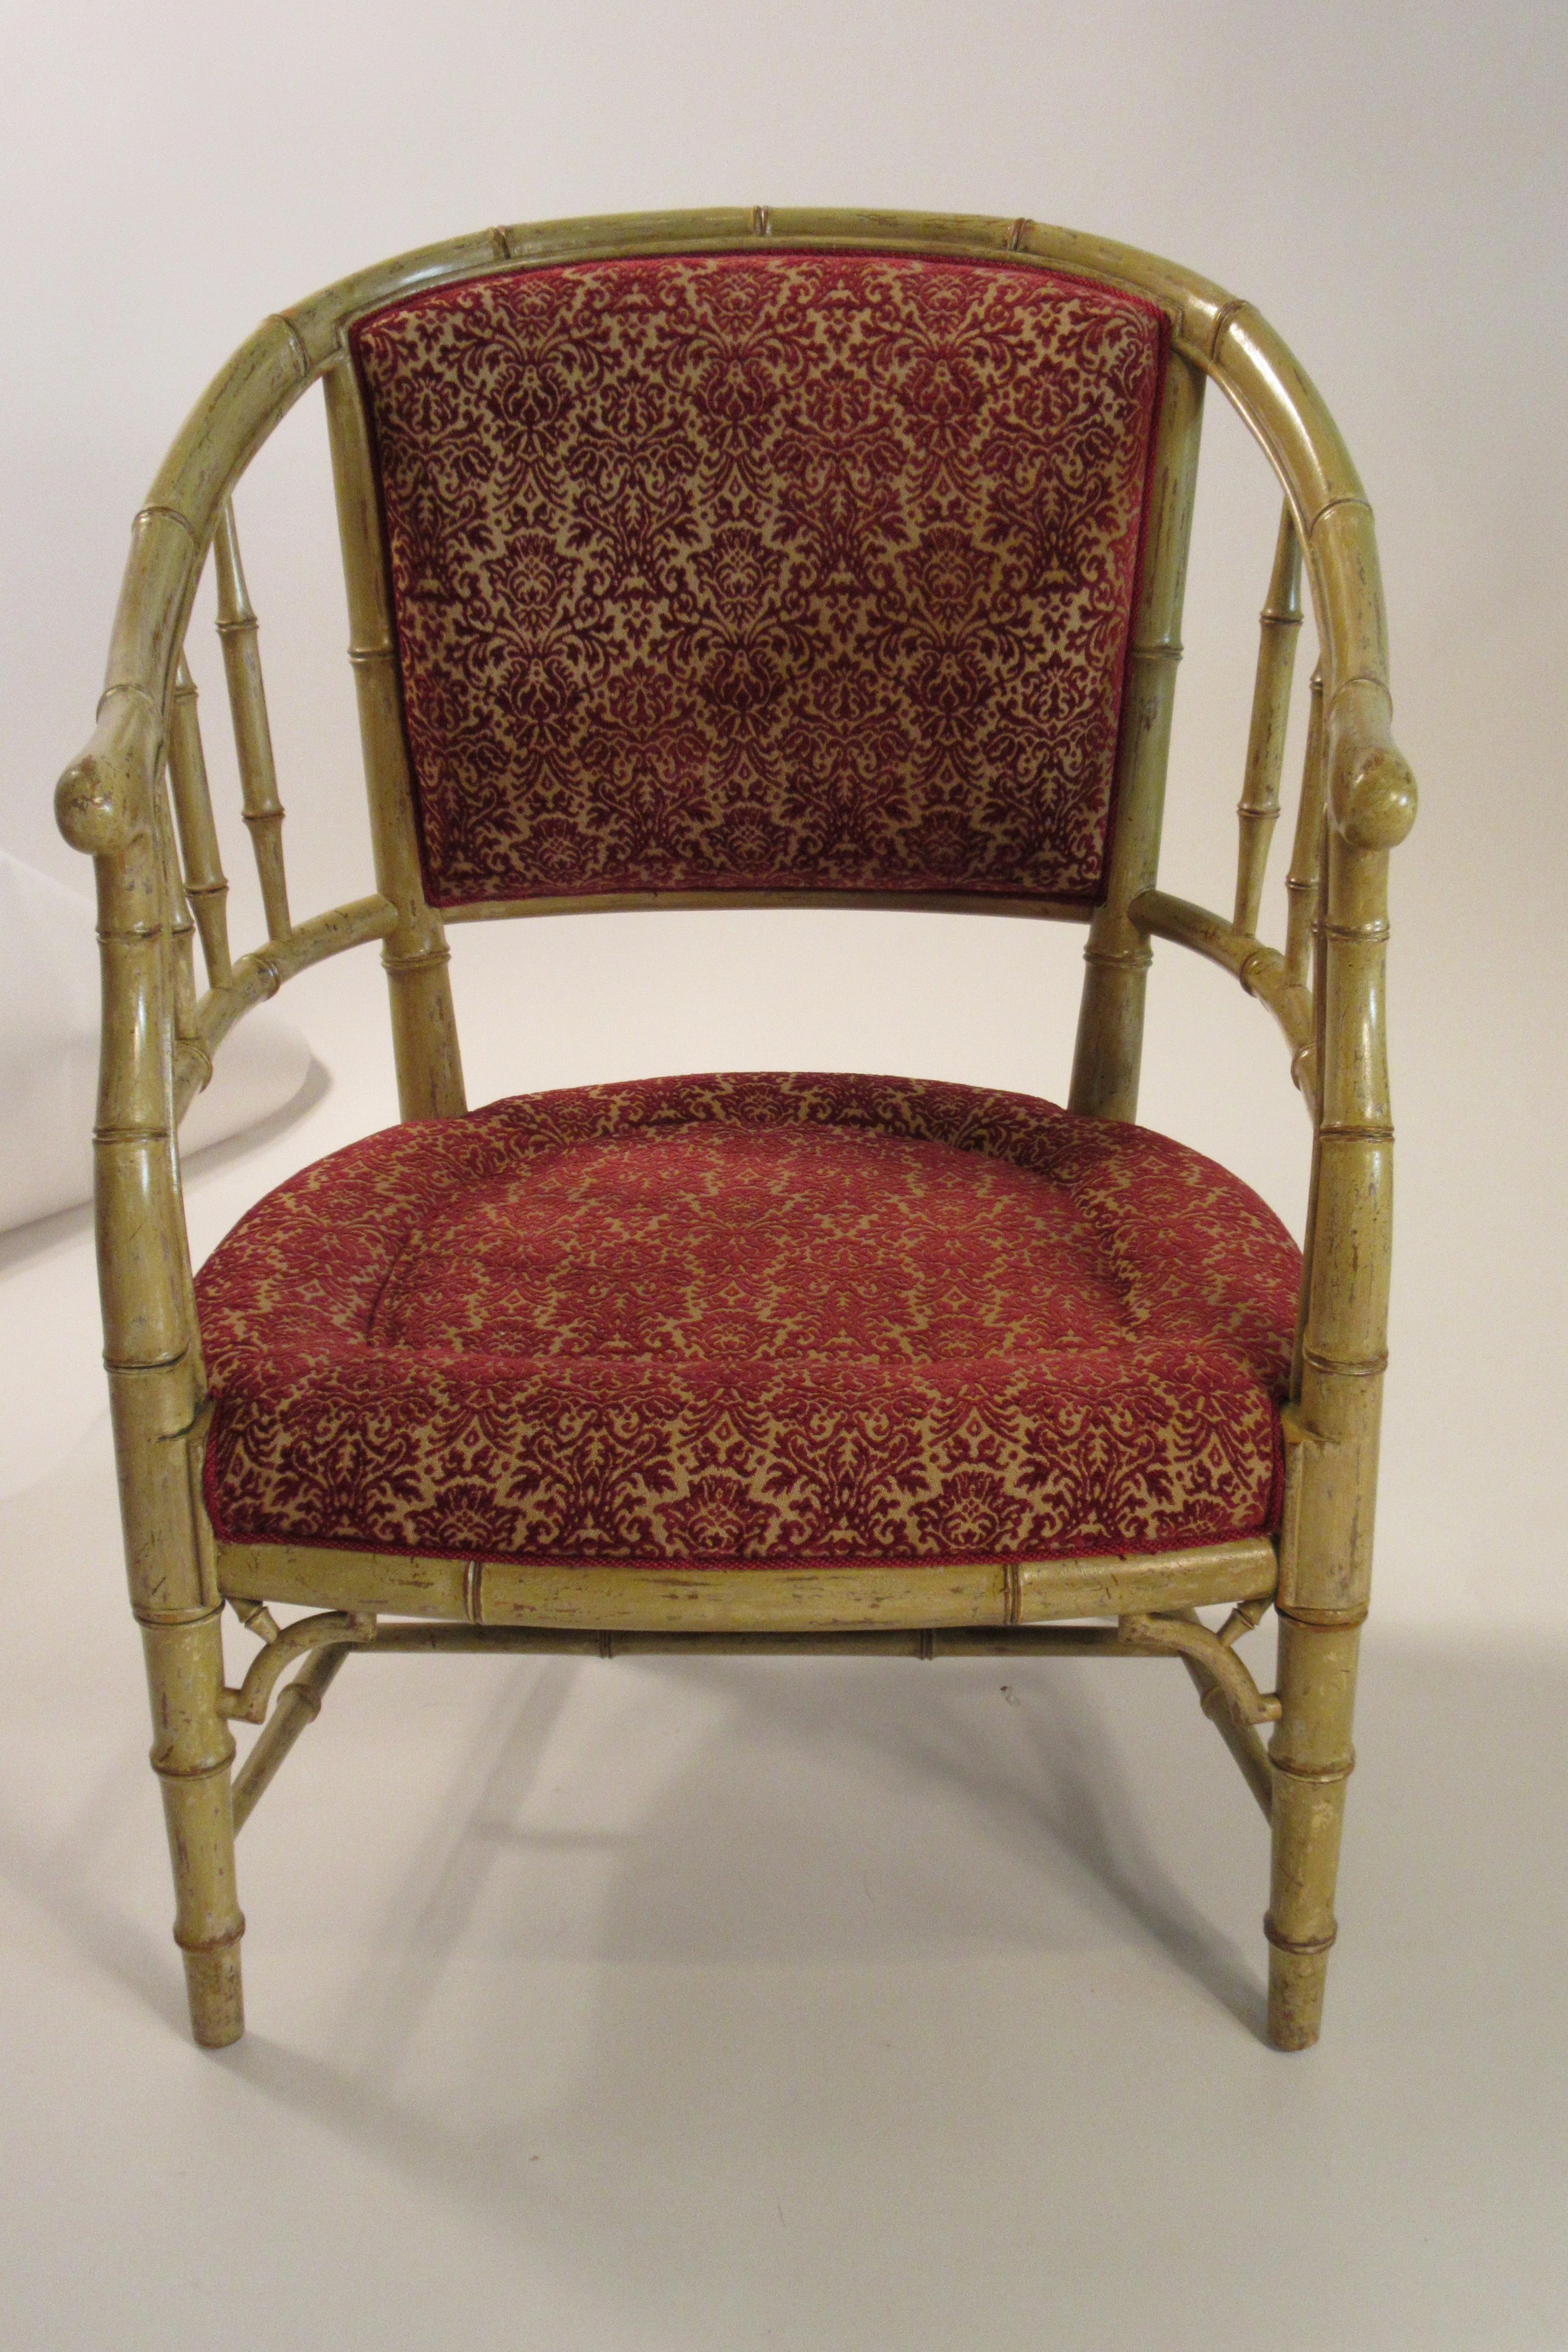 4 1960s faux bamboo tub chairs. Sold in pairs.